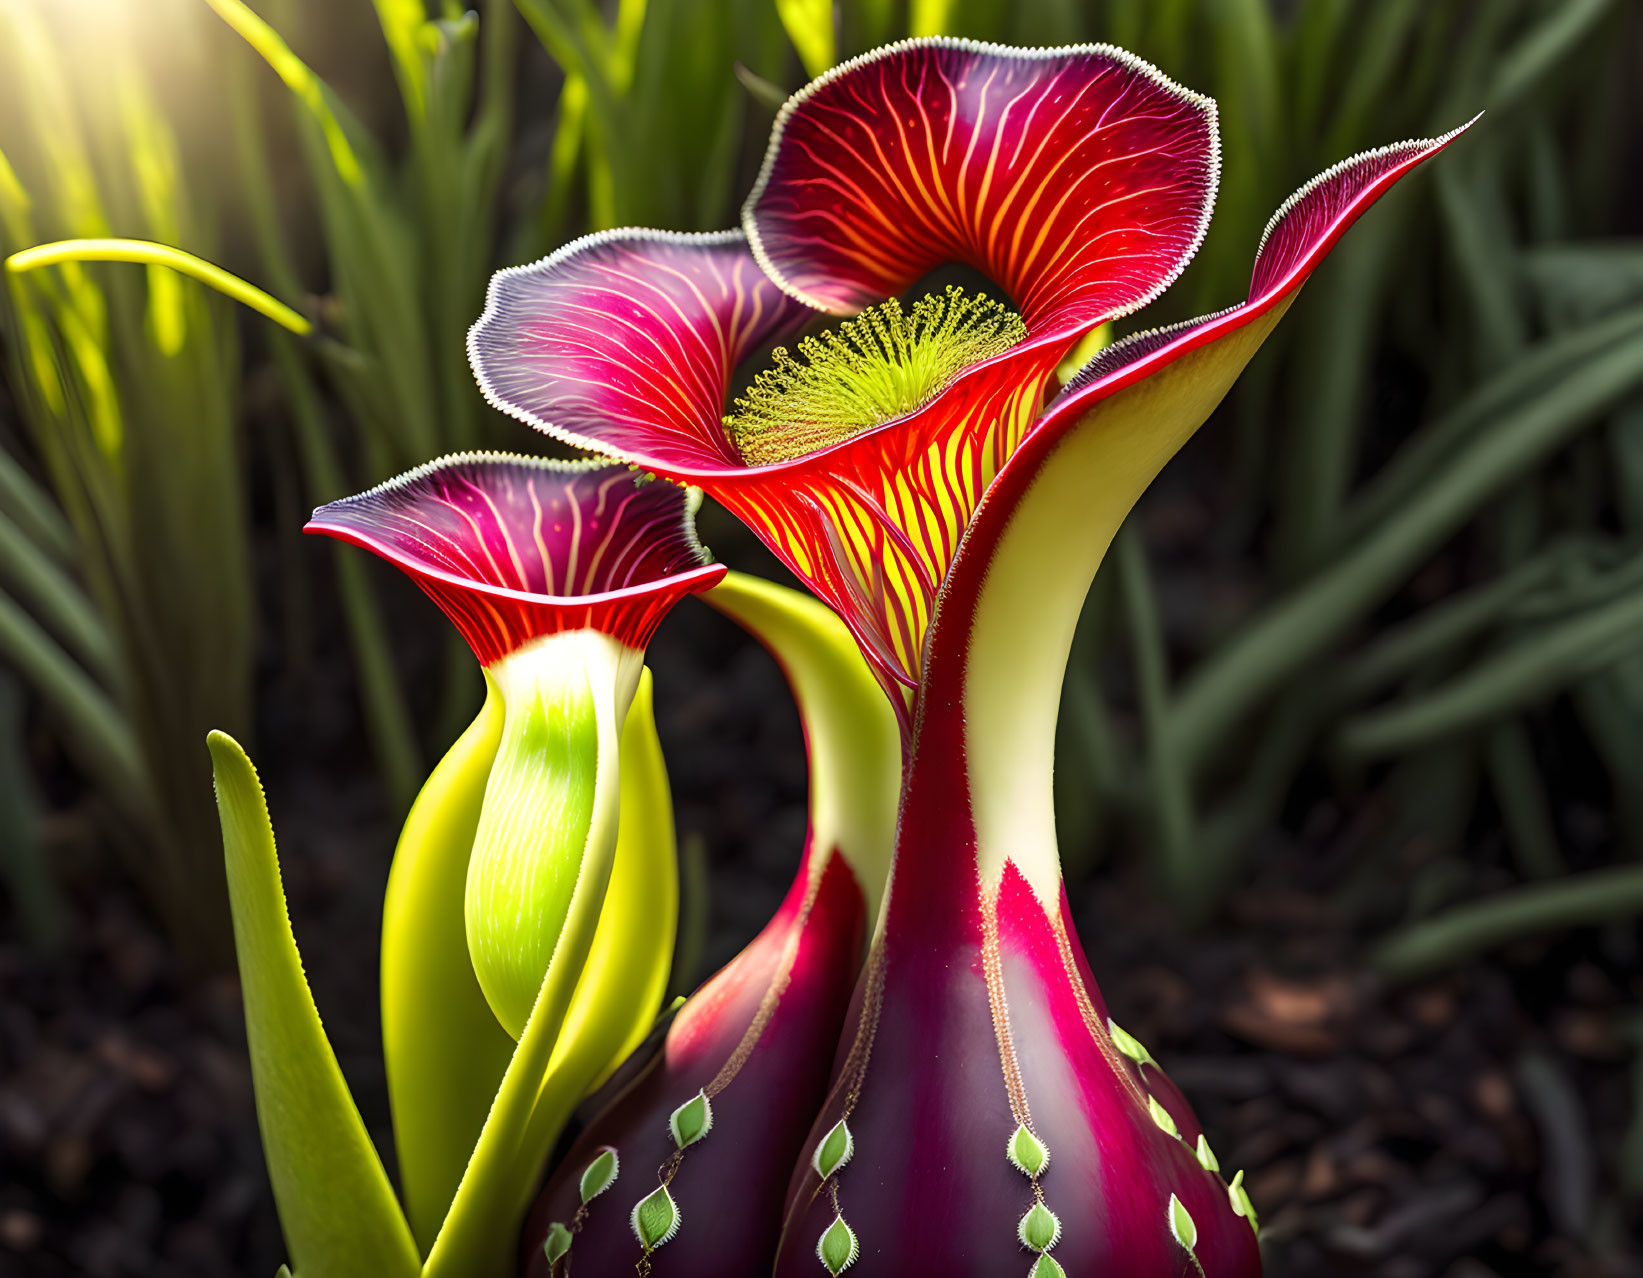 Colorful pitcher plant with red and green hues and intricate vein patterns nestled in lush foliage.